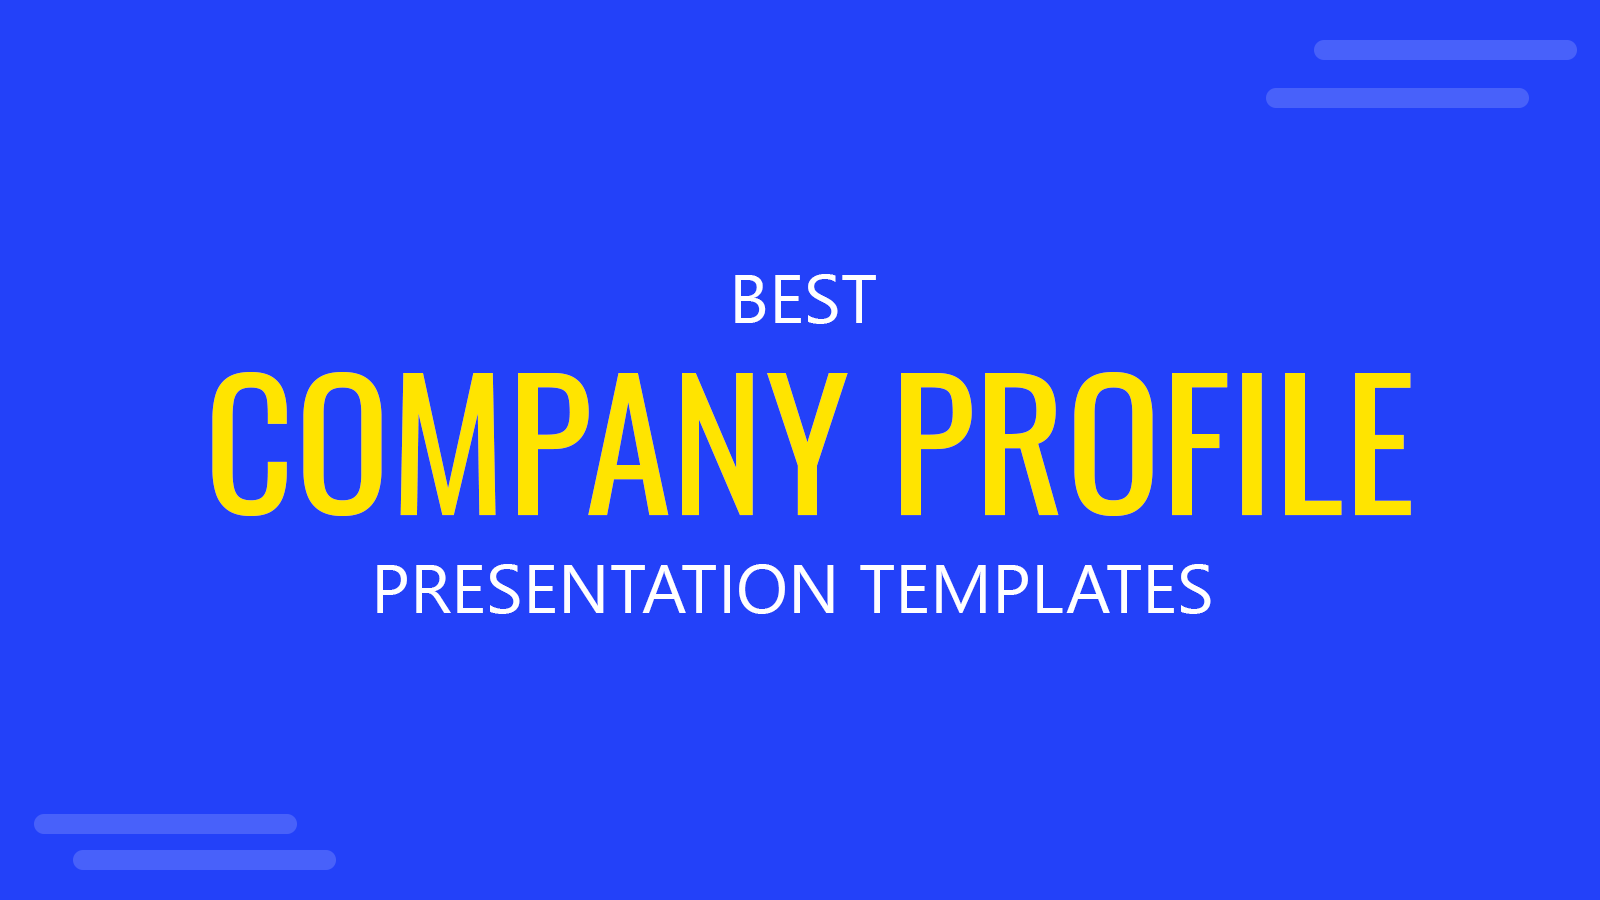 Best Company Profile Templates for PowerPoint